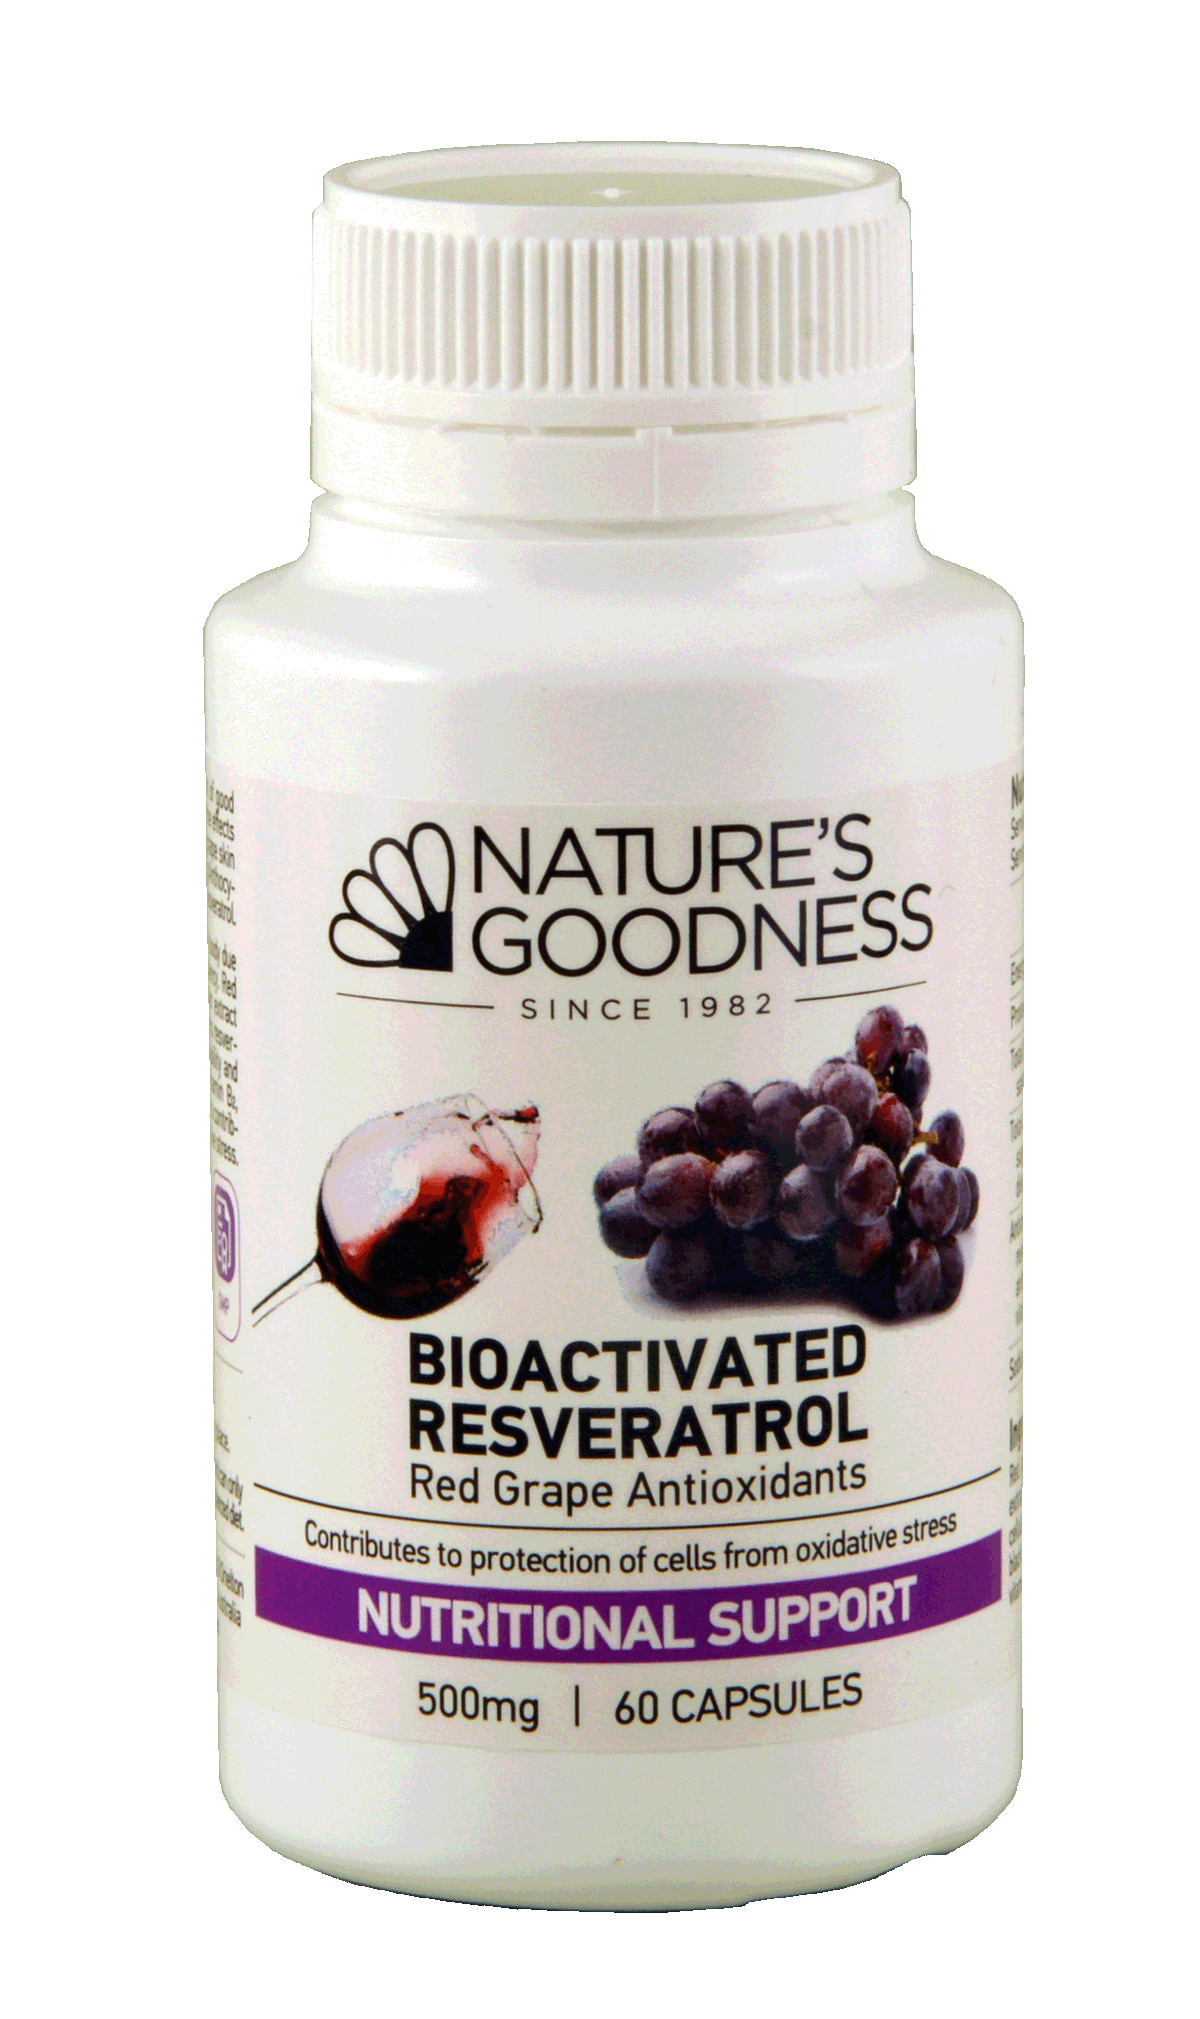 Nature's Goodness Bioactivated Resveratrol Red Grape Antioxidants 500mg